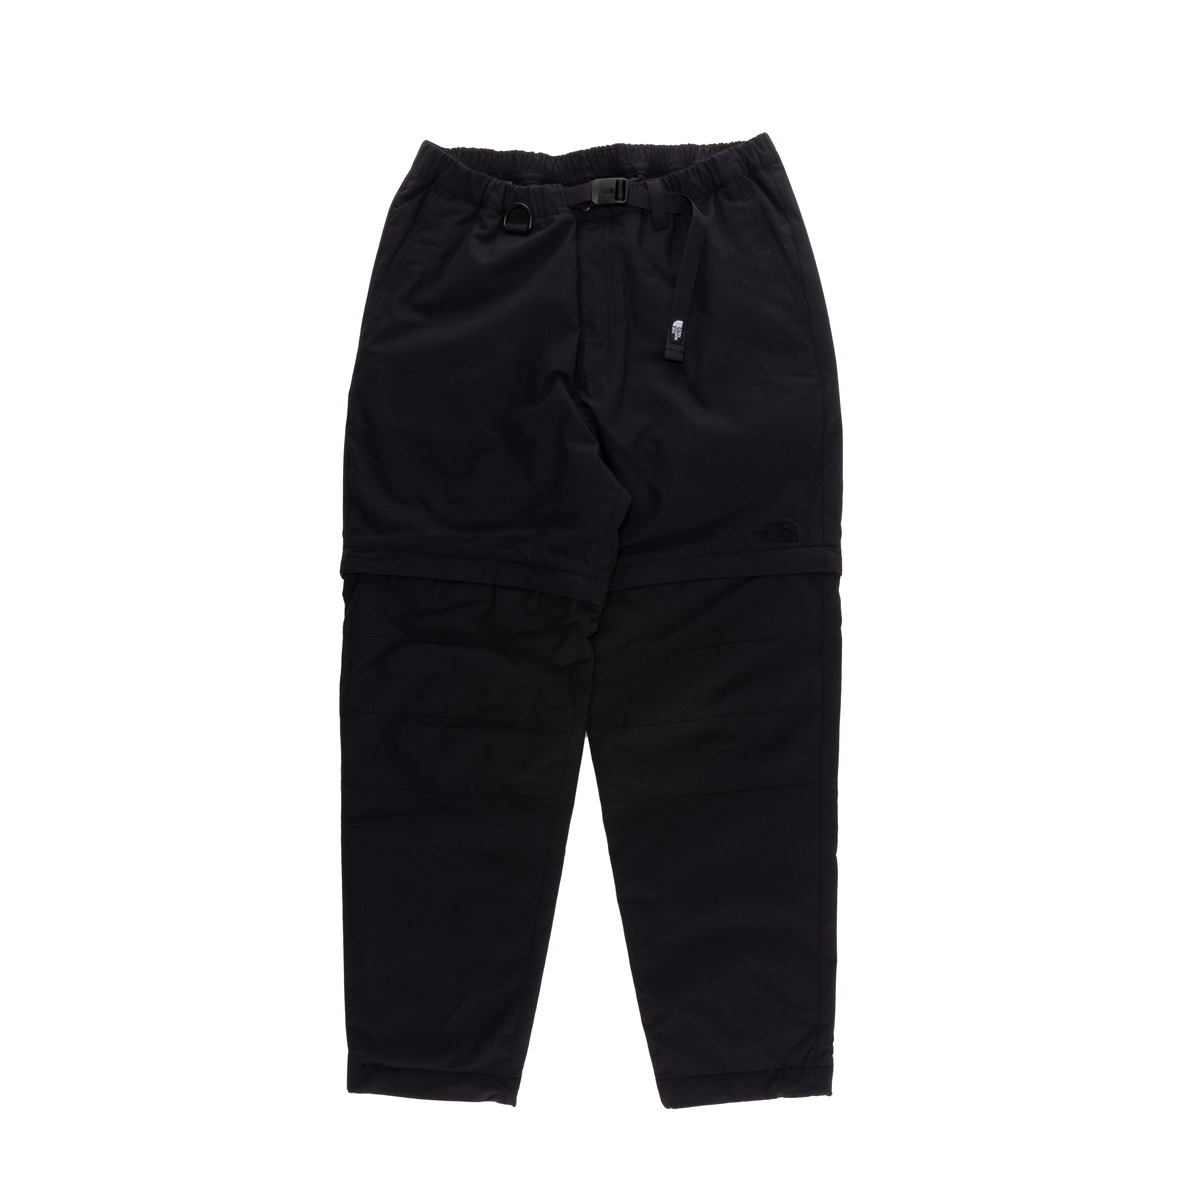 THE NORTH FACE】(ノースフェイス) Firefly Insulated Pant NB82237 